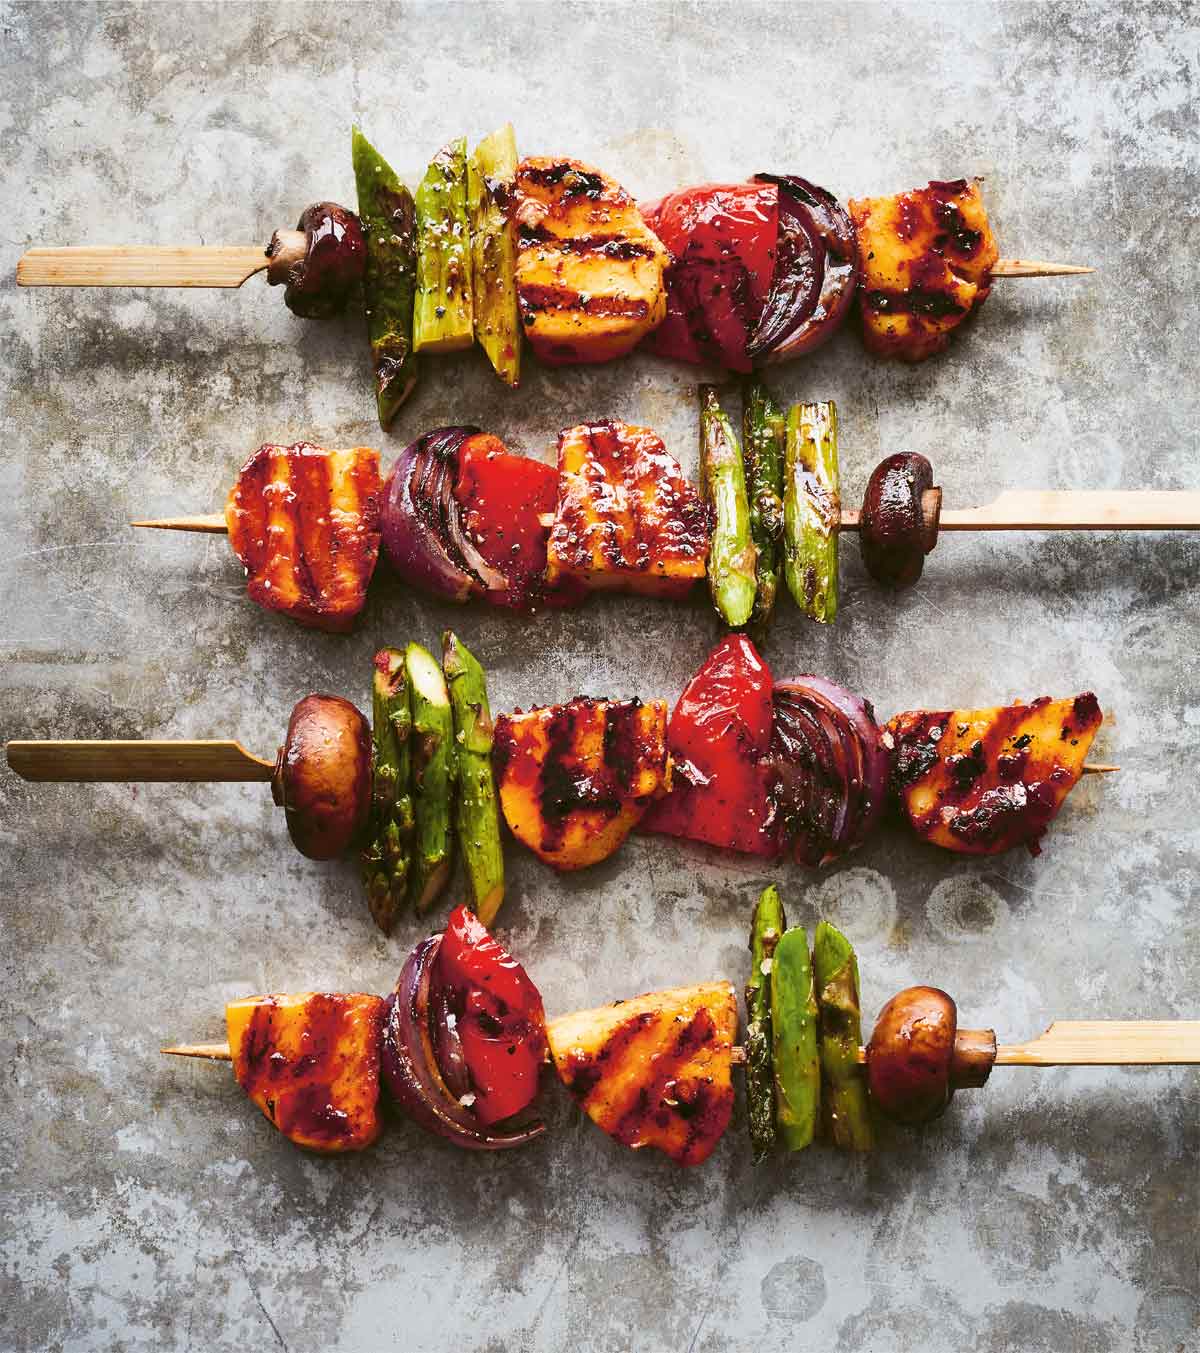 Grilled Vegetable Skewers With Harissa-Marinated Halloumi Recipe | Leite's Culinaria